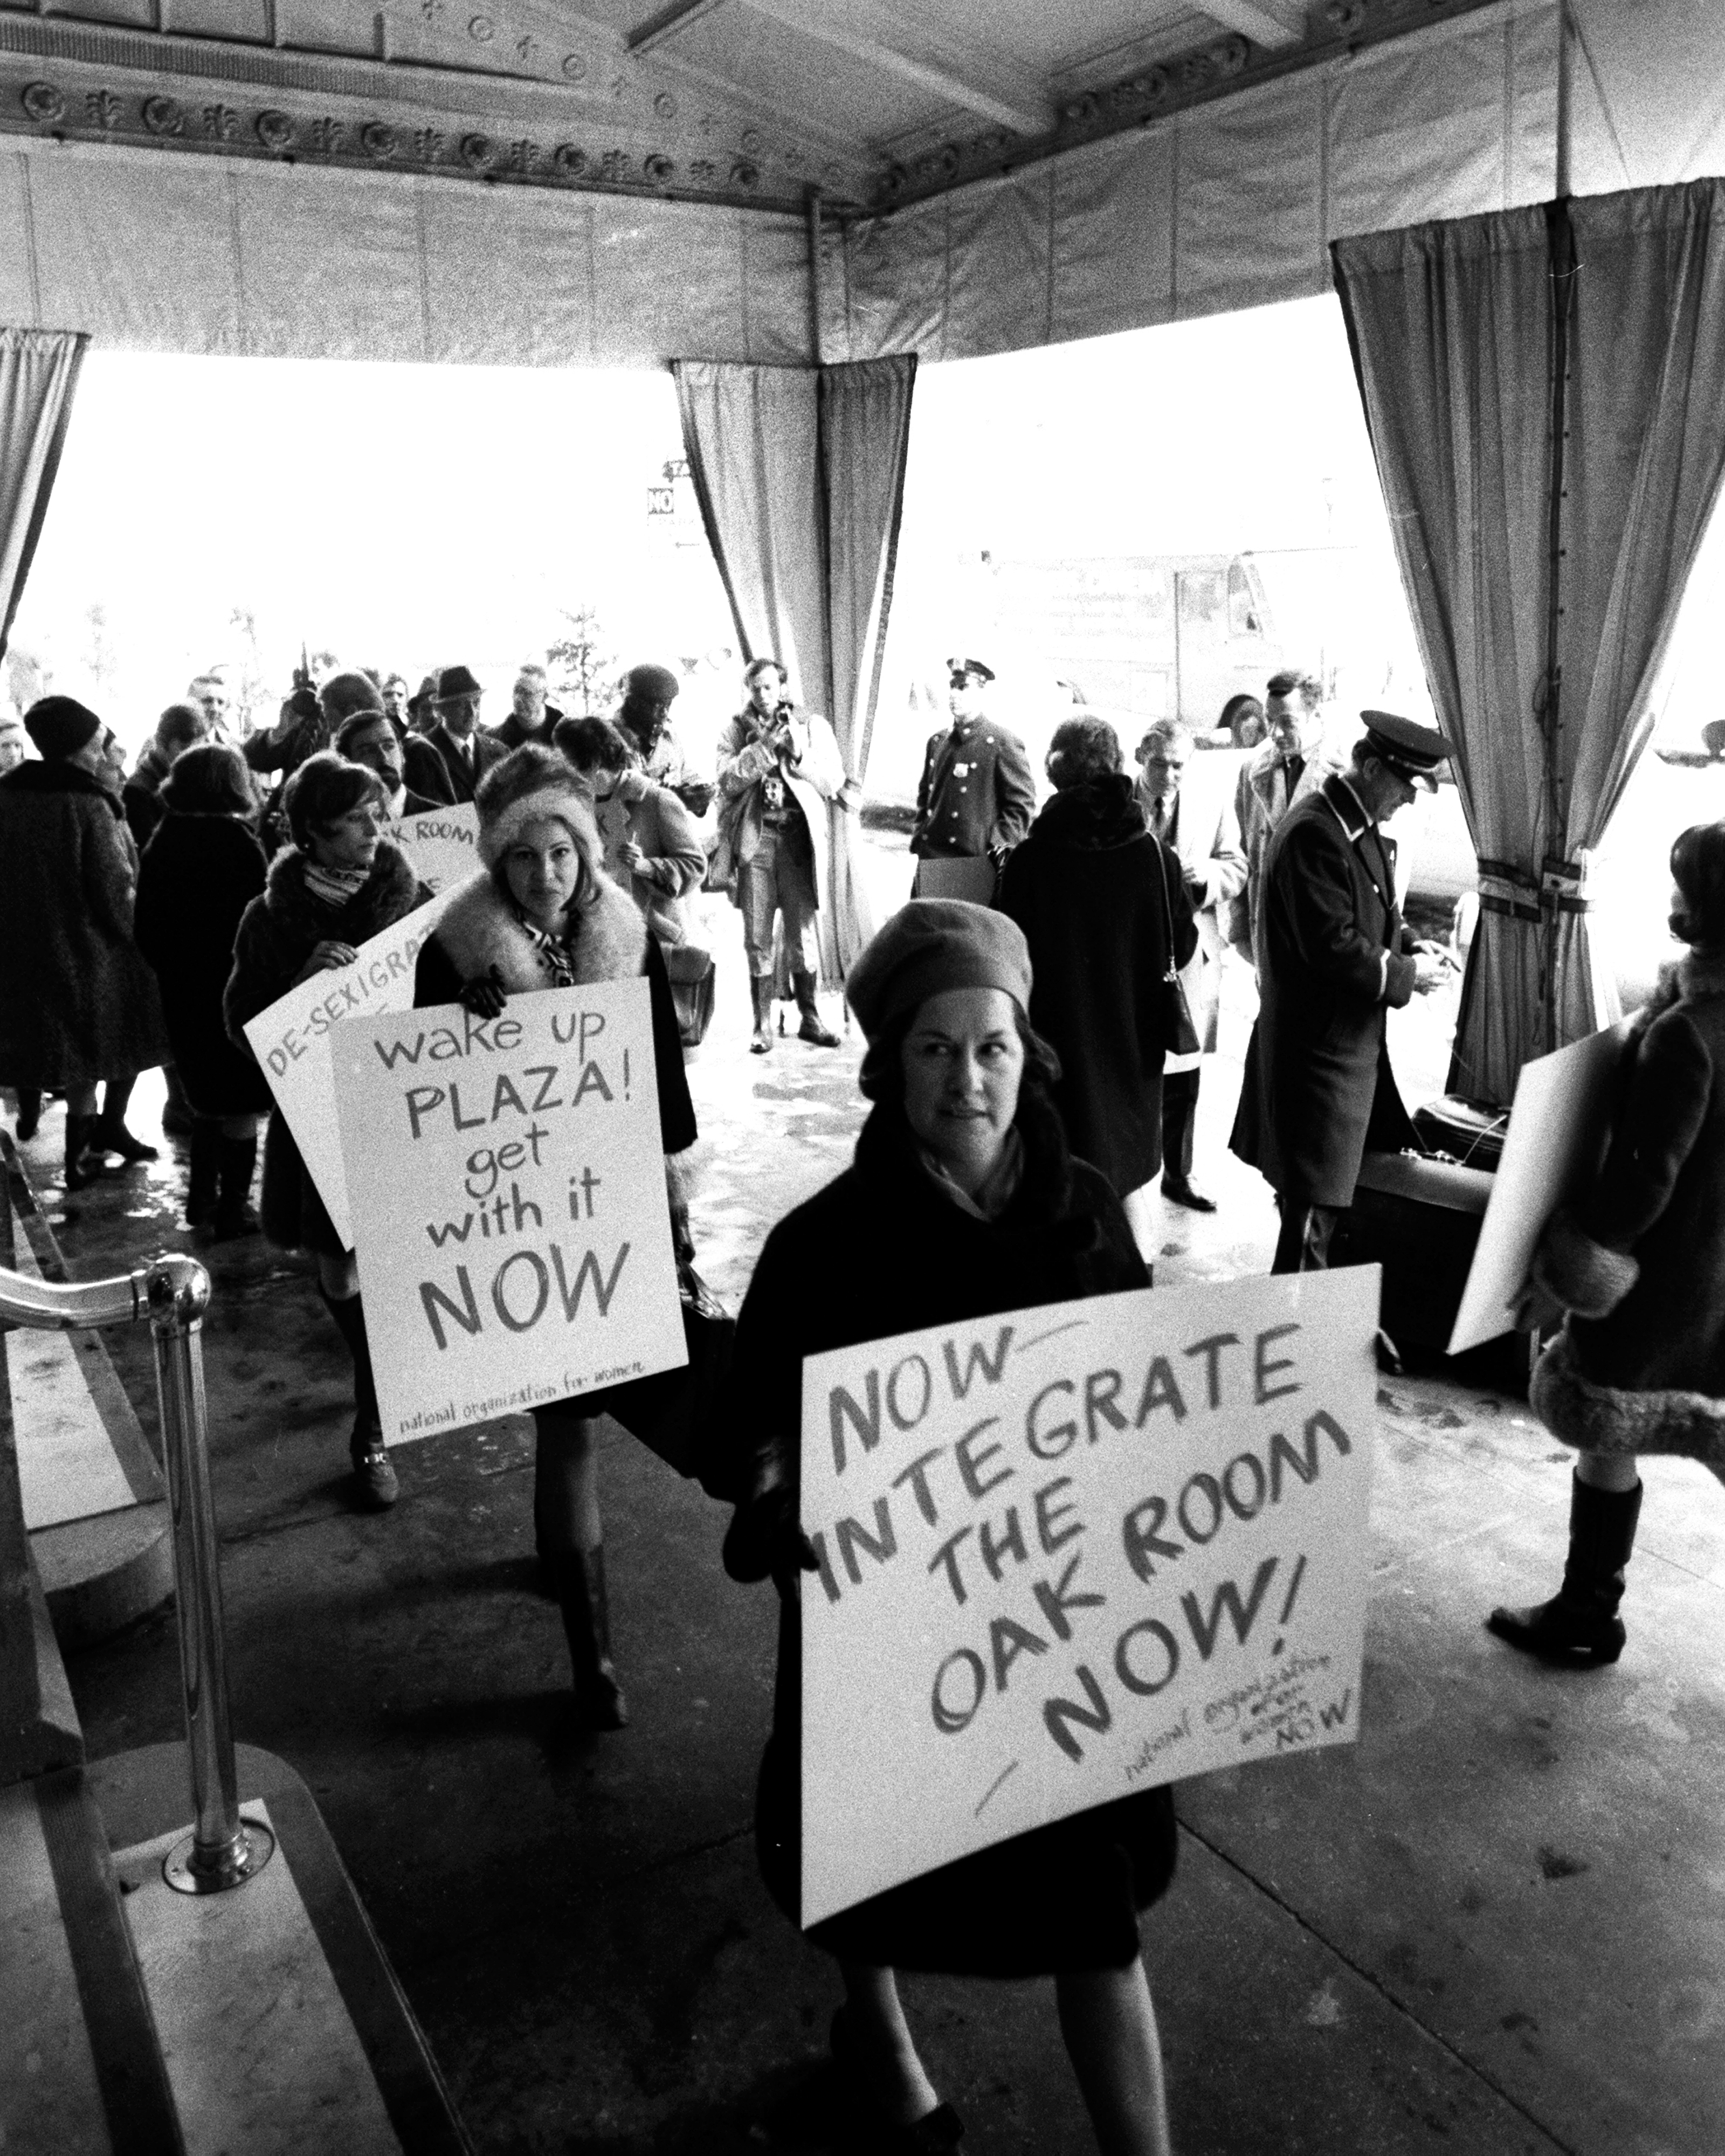 The National Organization for Women, upset by the "men only" policy of the Hotel Plaza, demonstrate outside. (New York Daily News Archive—Getty Images)